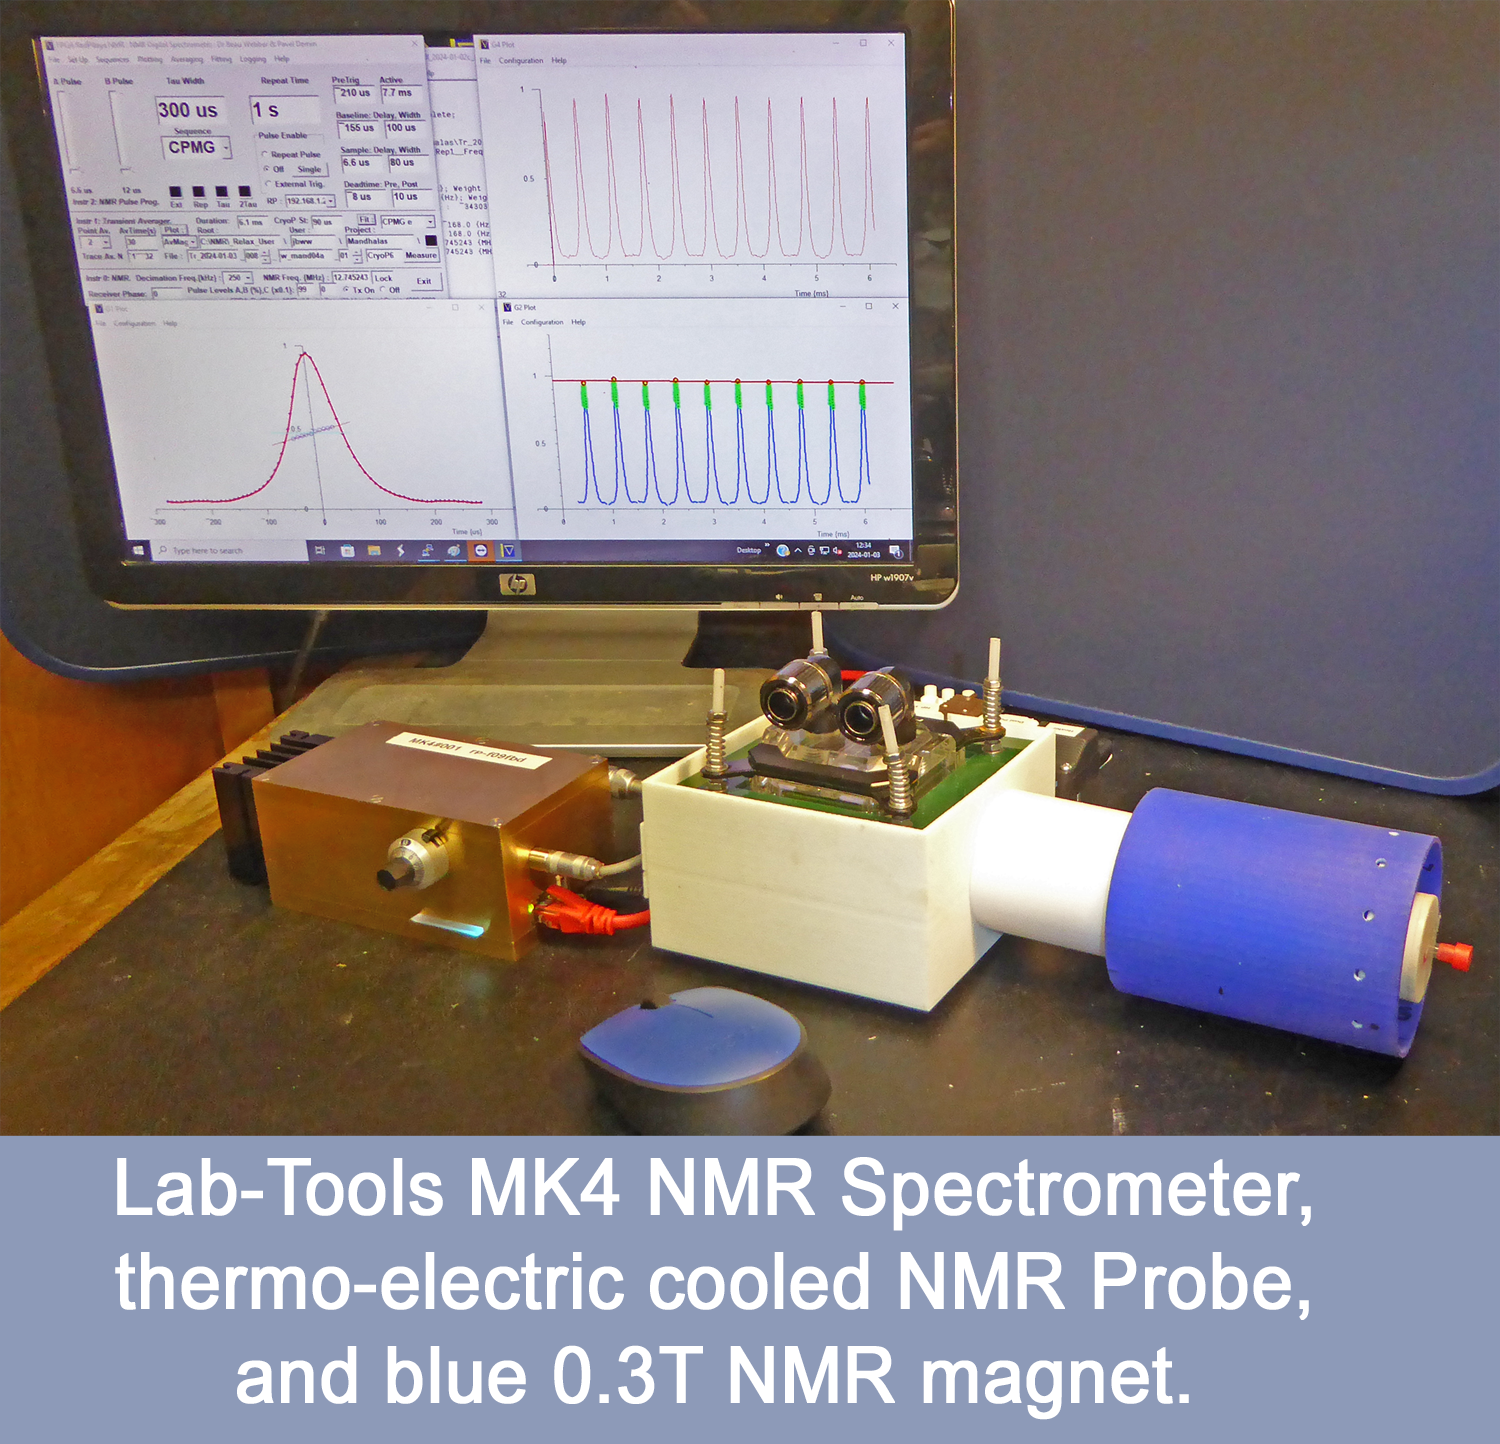 Lab-Tools Mk4 NMR Spectrometer, Peltier thermo-electrically cooled (-45C to +80C) NMR Probe, and blue 0.3T 36mm bore NMR magnet. Excellent for Materials-Science and process monitoring & control : https://nmrspectrometer.lab-tools.com/